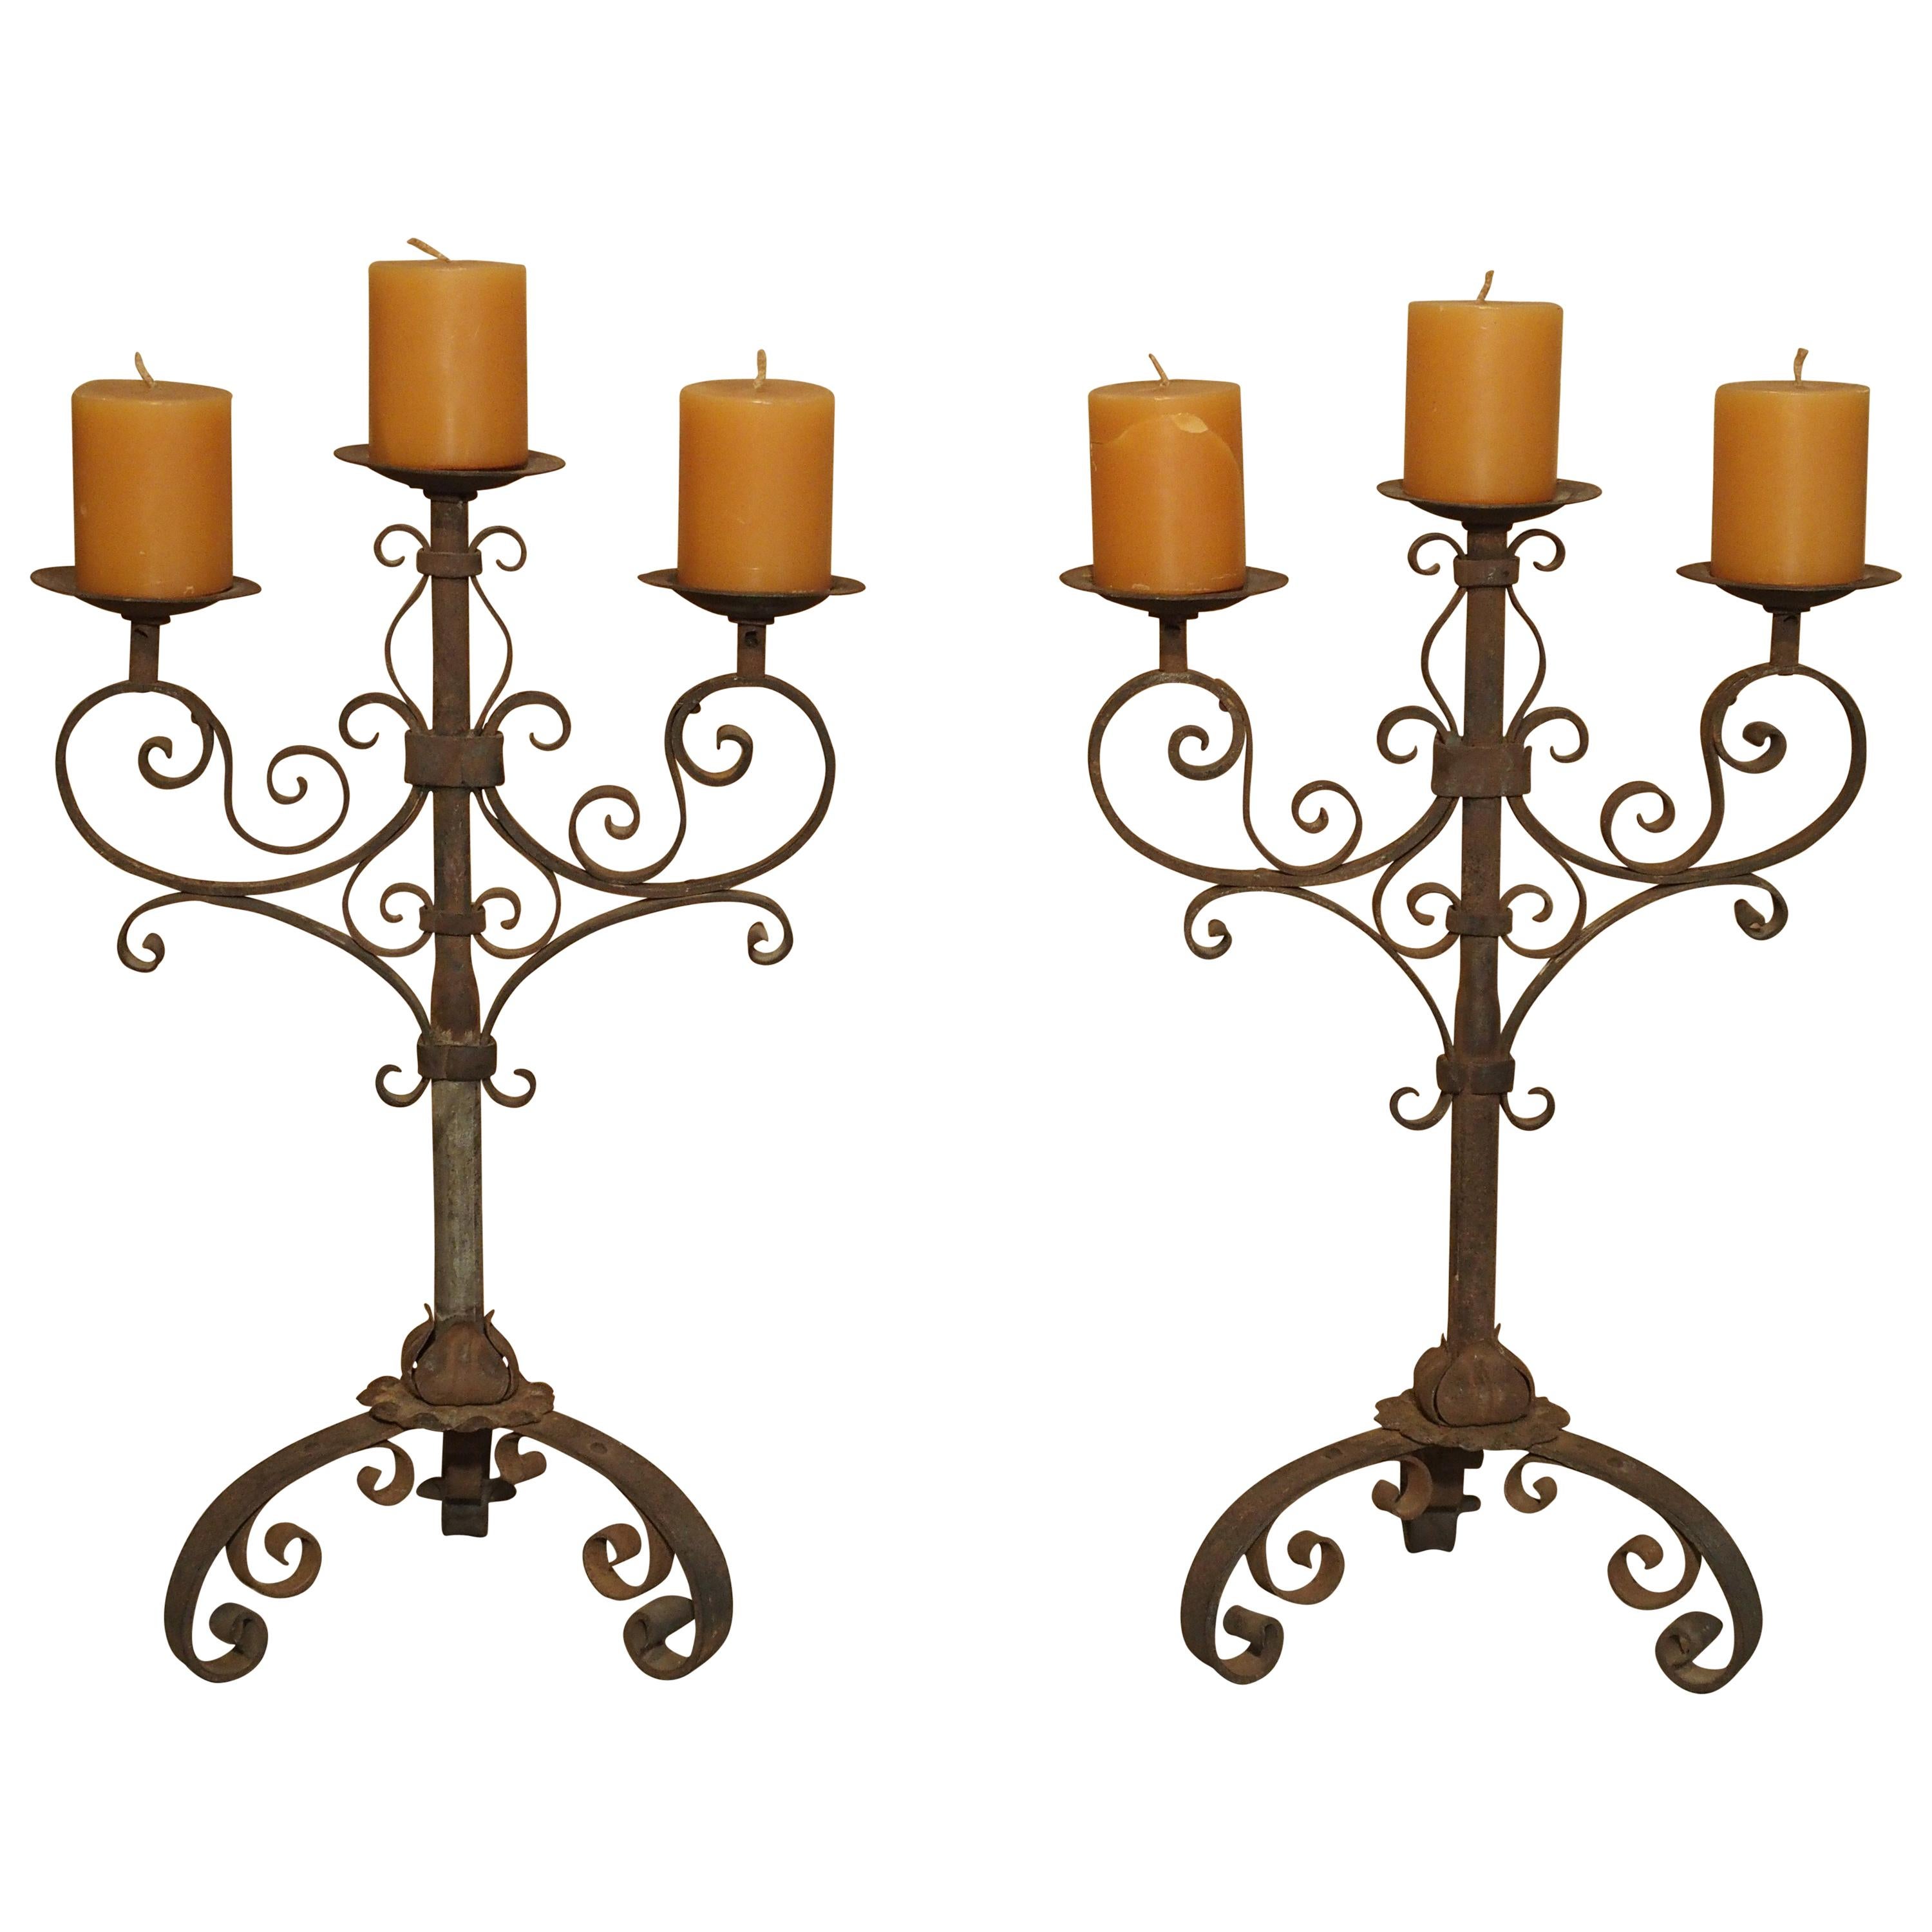 Pair of Small Early 1900s Wrought Iron Candelabras from Italy